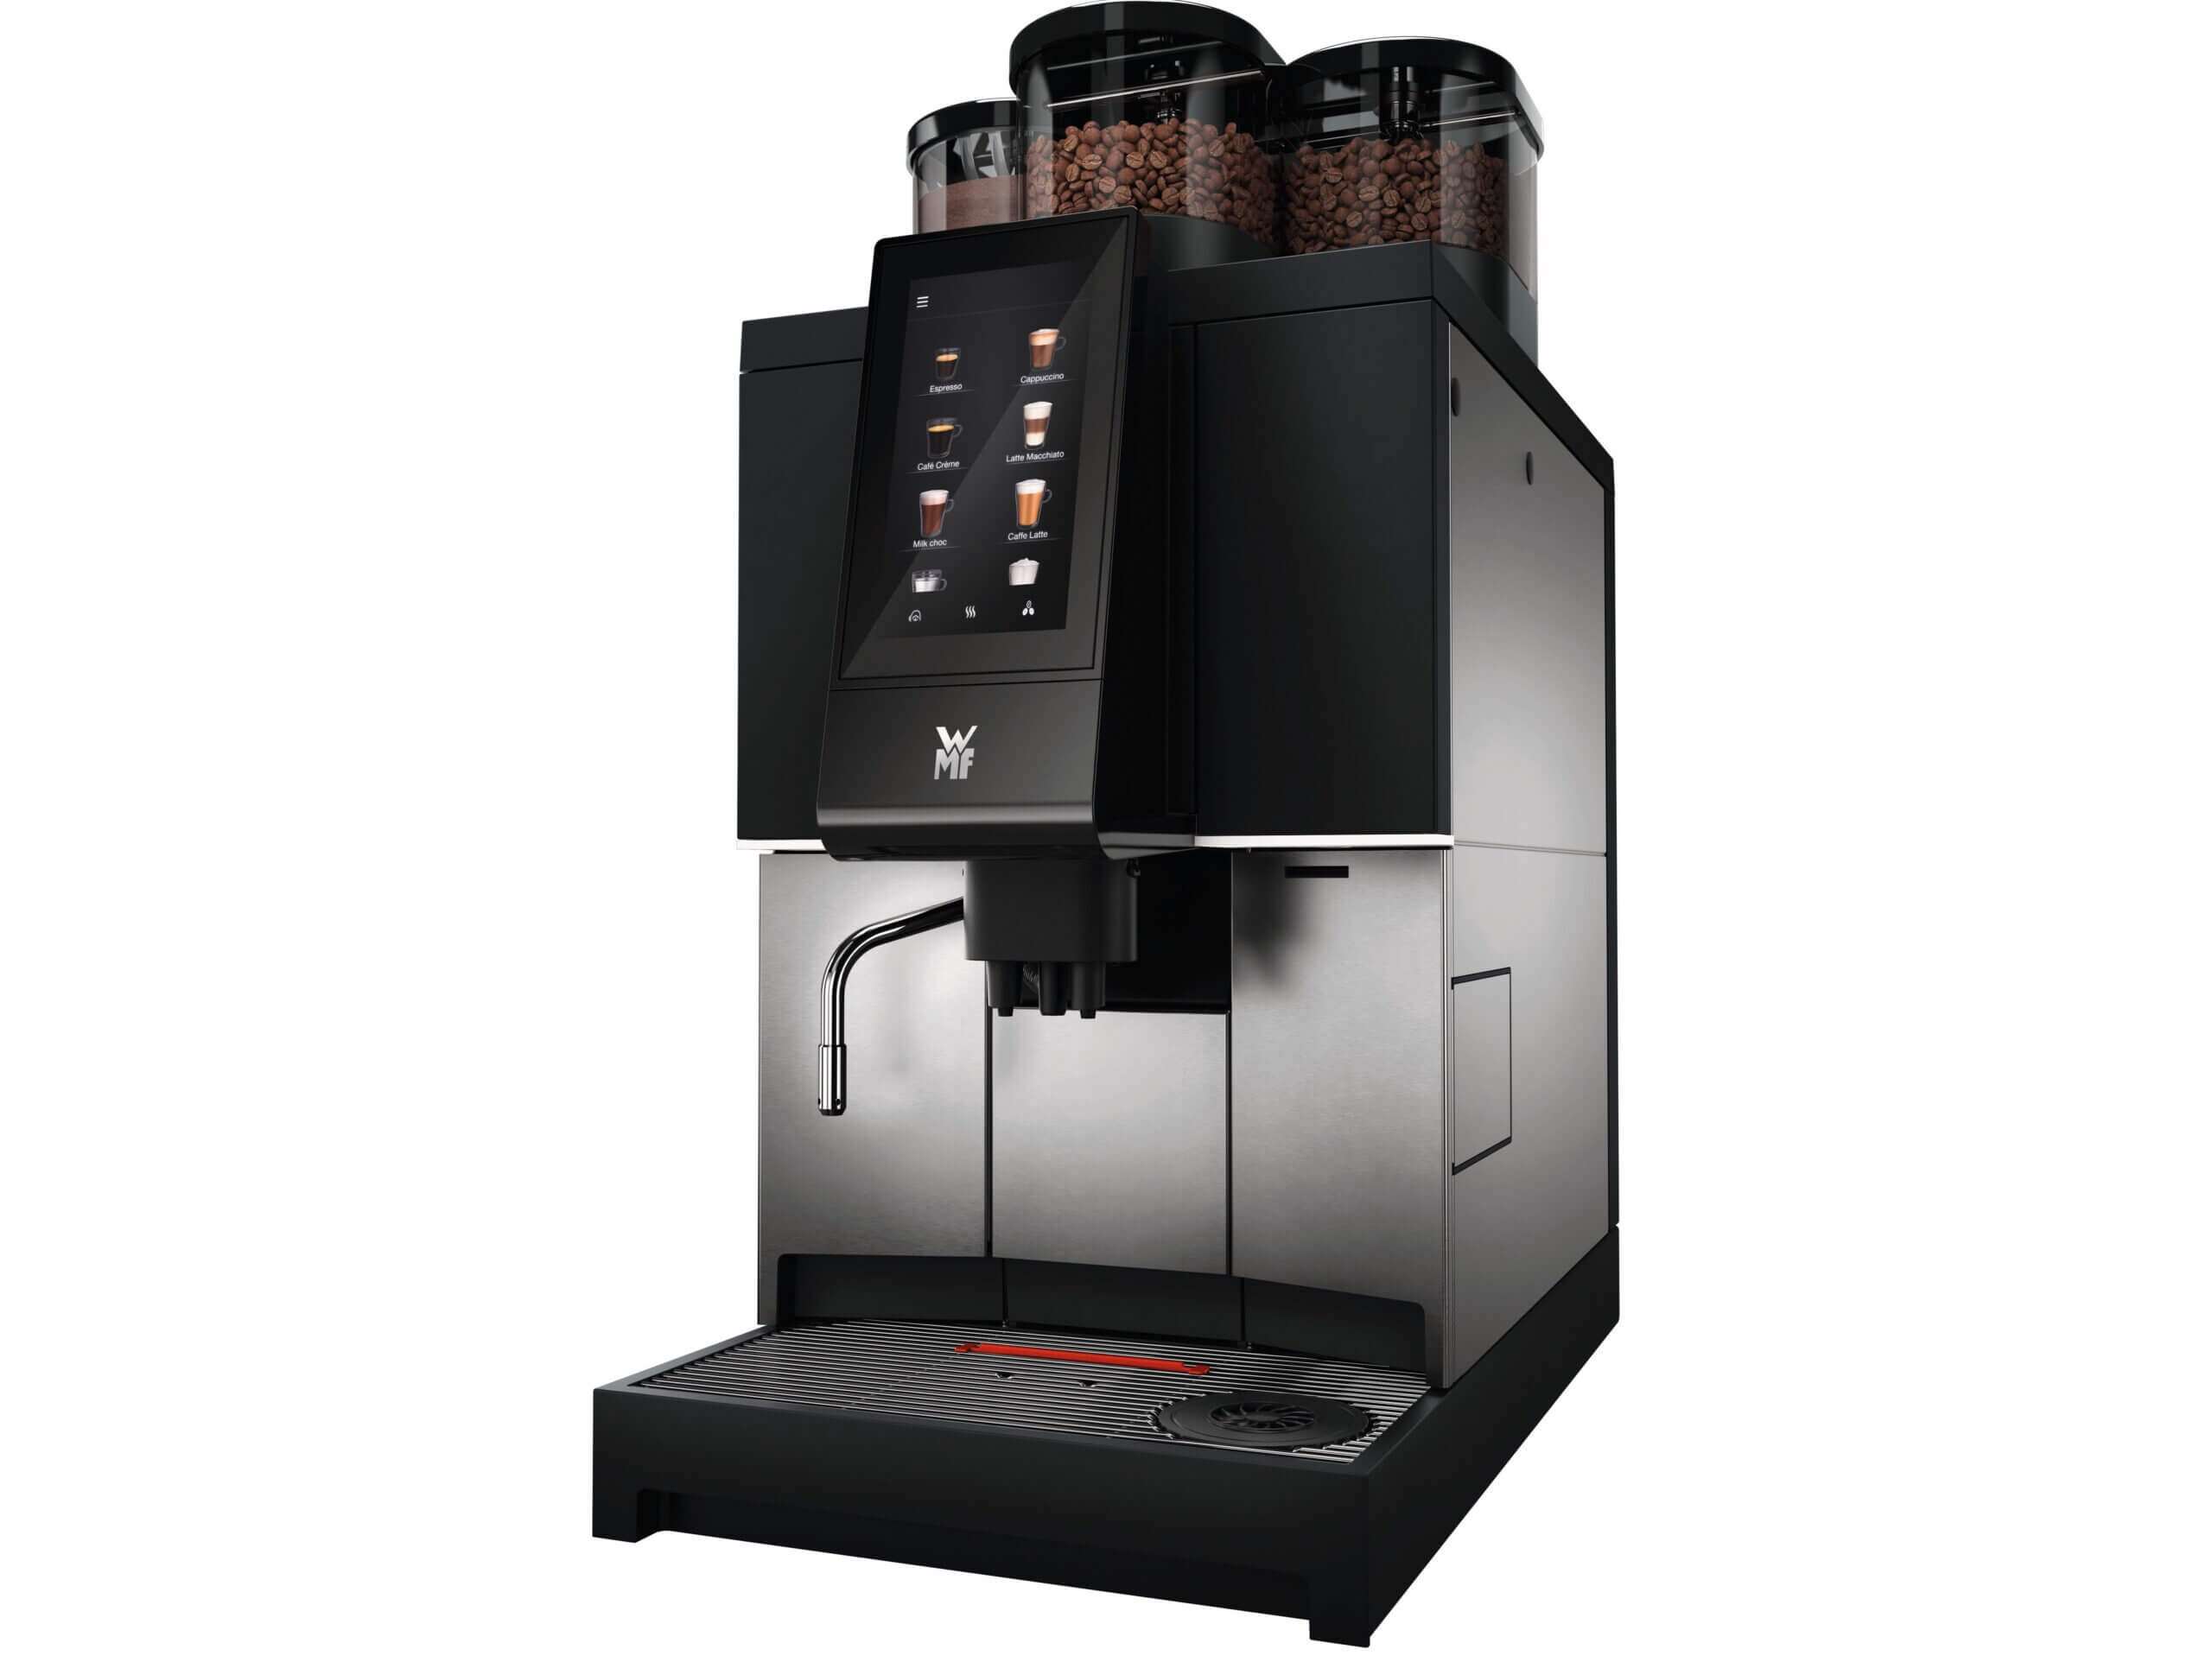 FREE UK MAINLAND DELIVERY WMF Bean to Cup Commercial Coffee Machine 